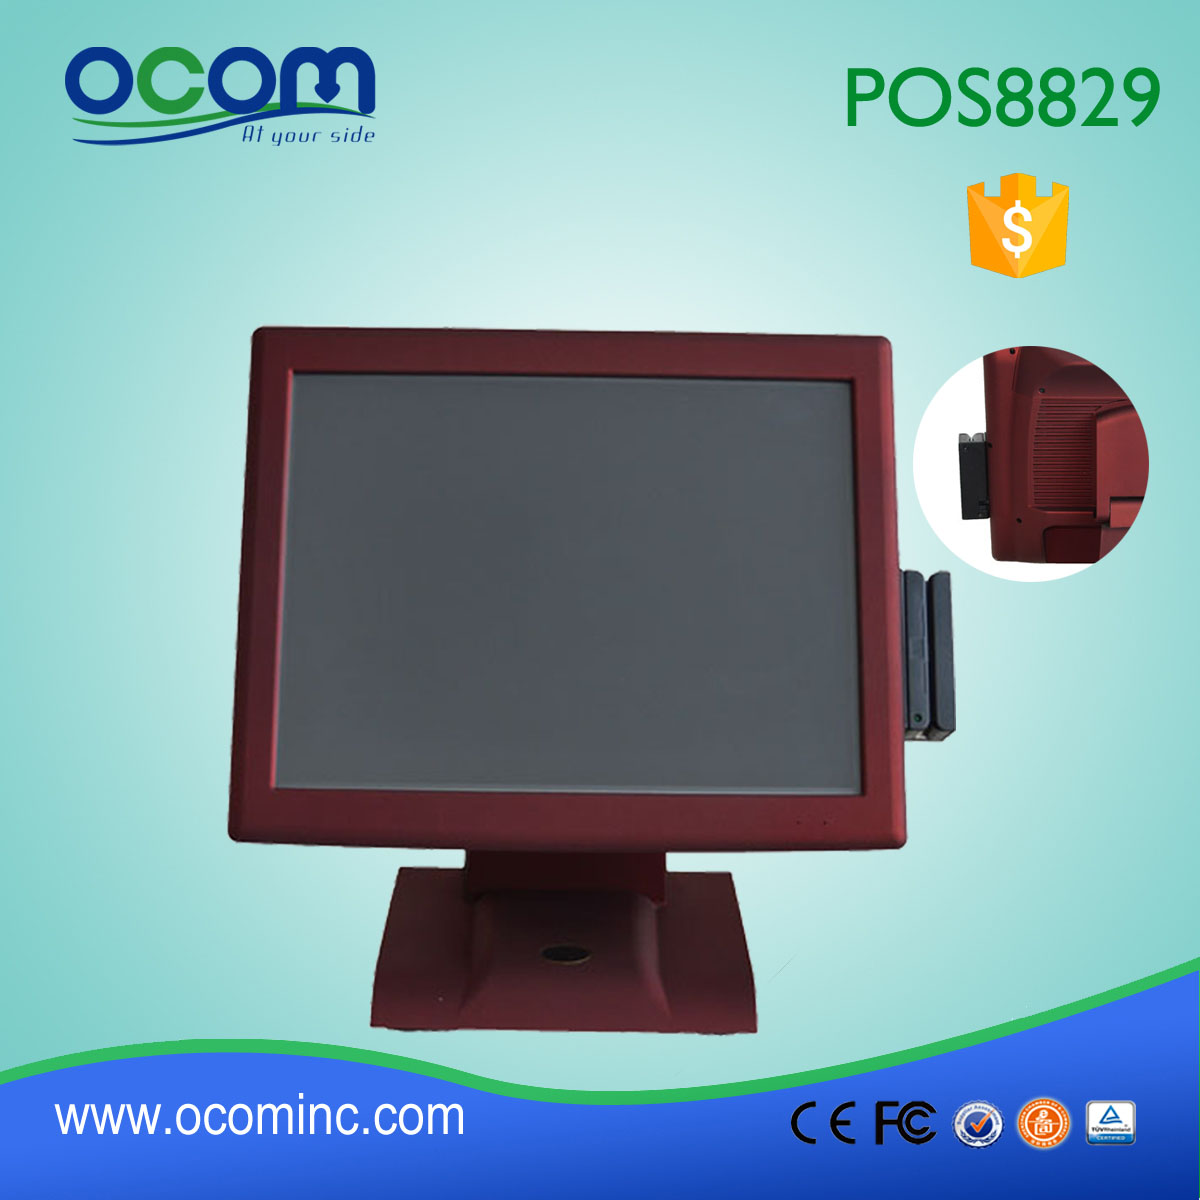 15 inch All-in-one POS Machine, Magnetic card reader, LCD customer display, wifi optional POS8829